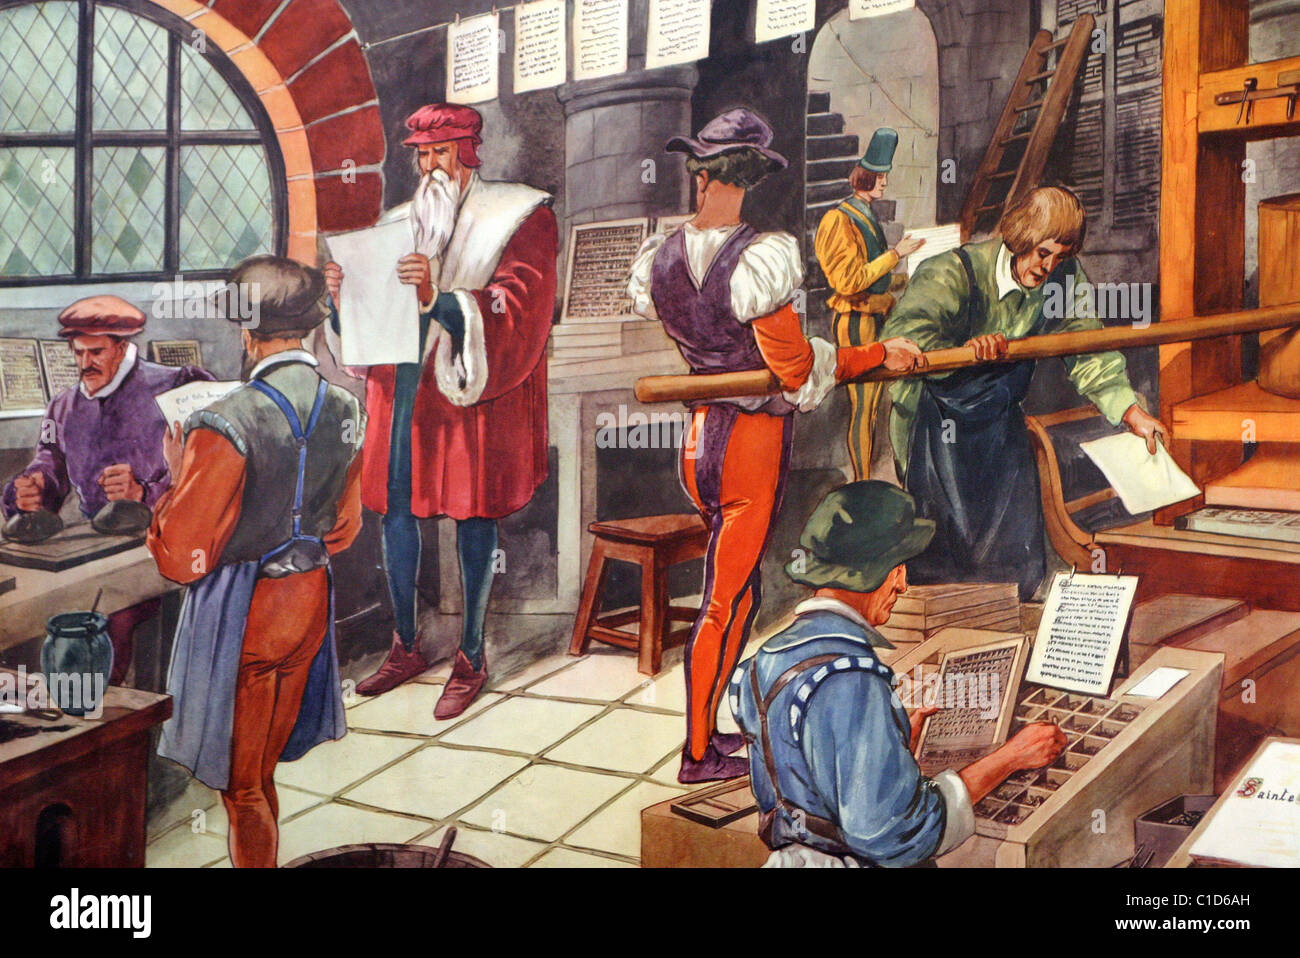 France, Vosges, Epinal, Imagerie, representation of the printery in Gutenberg's time Stock Photo